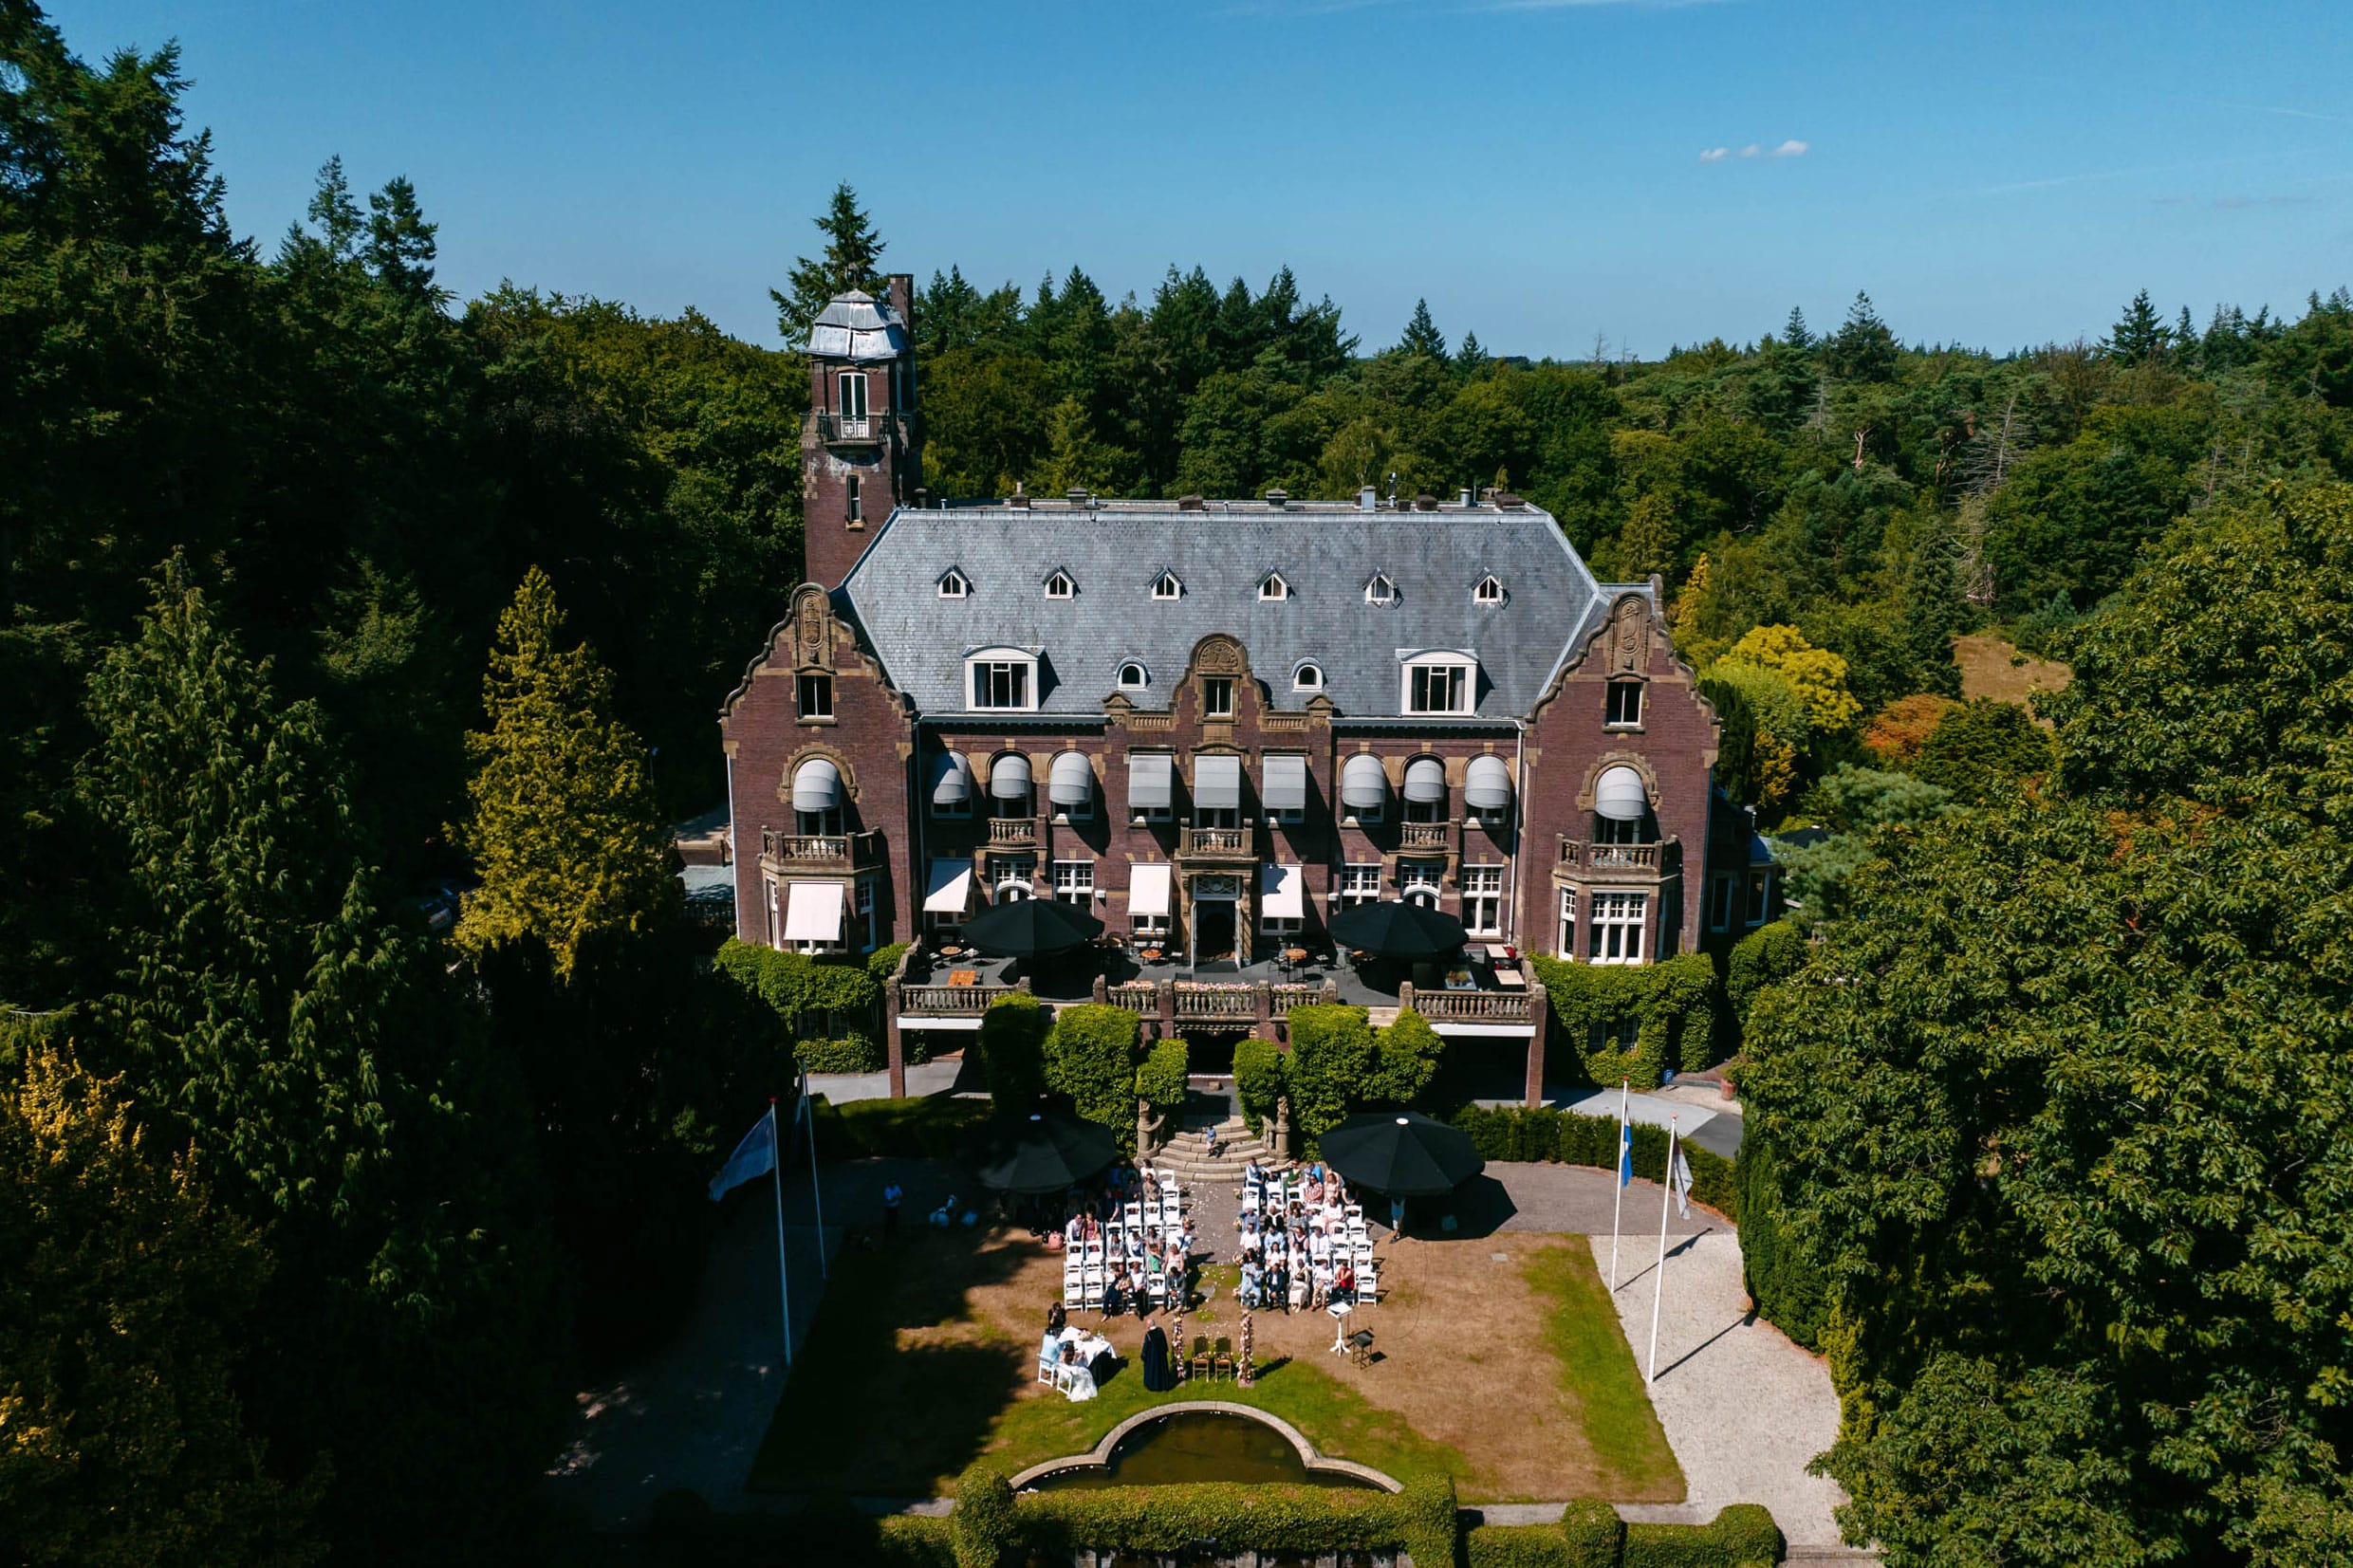 An aerial view of the beautiful Castle de Hooge Vuursche surrounded by trees.